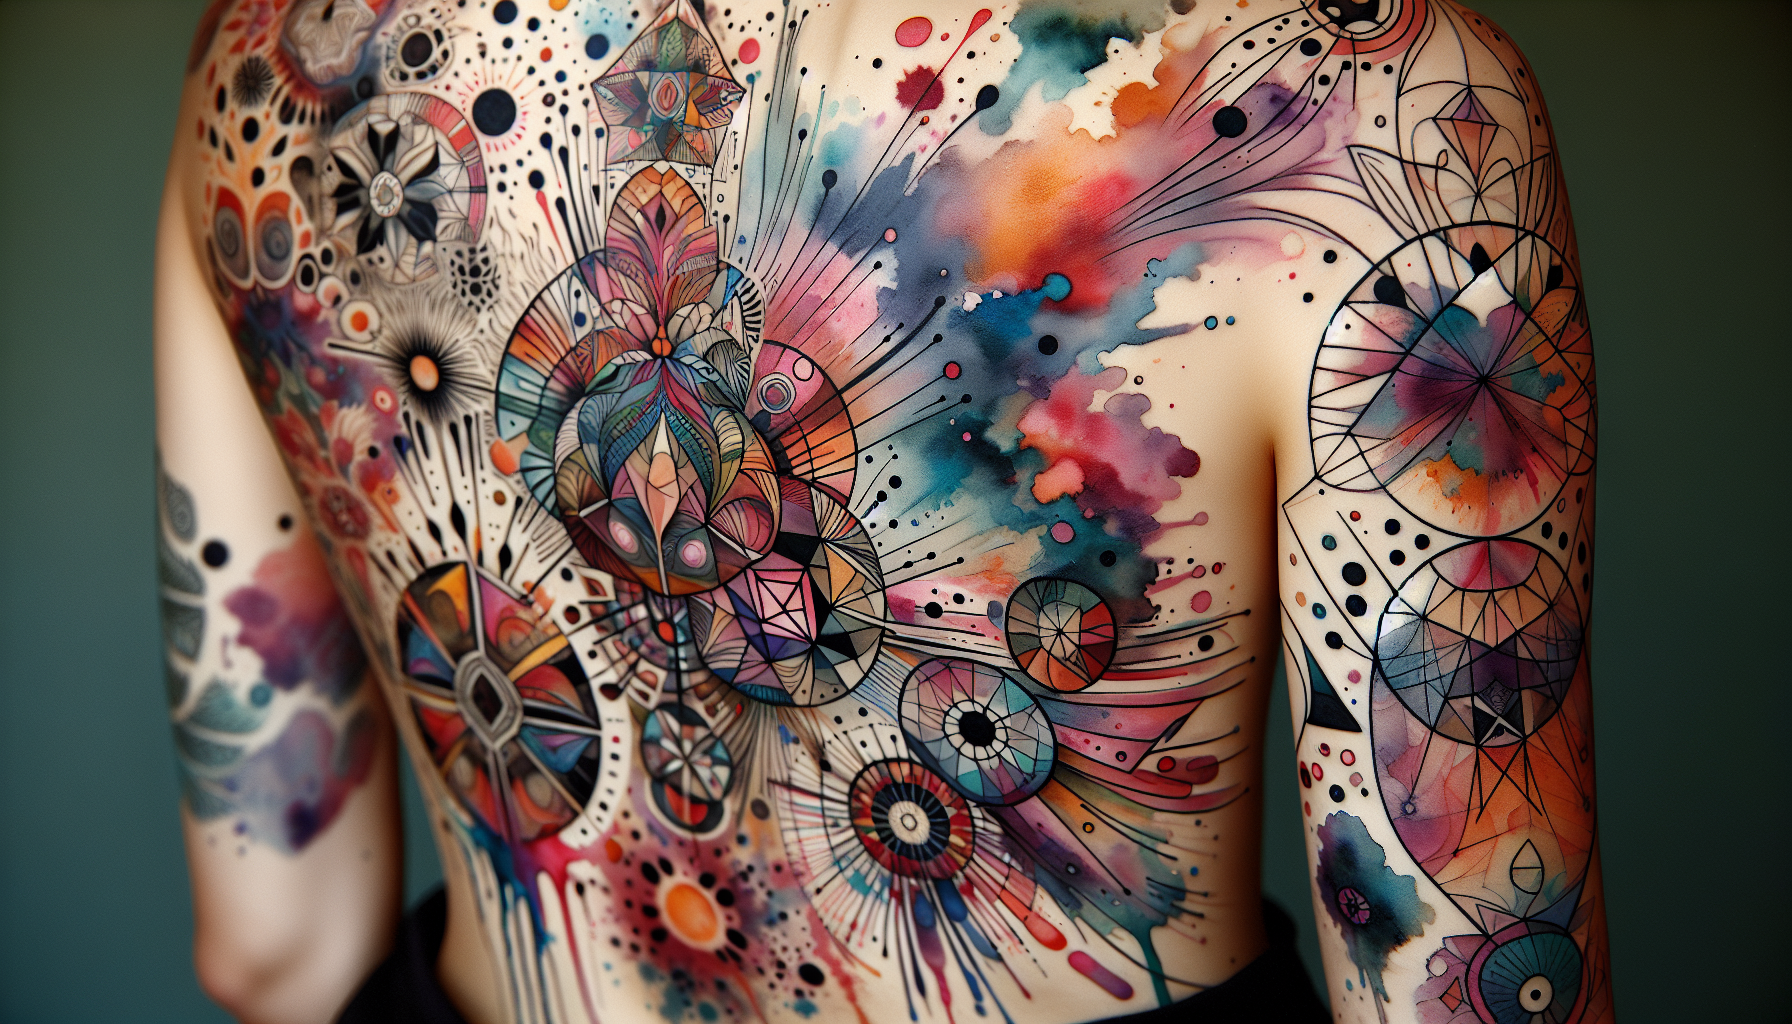 Abstract and watercolor tattoos with unique designs and vibrant colors